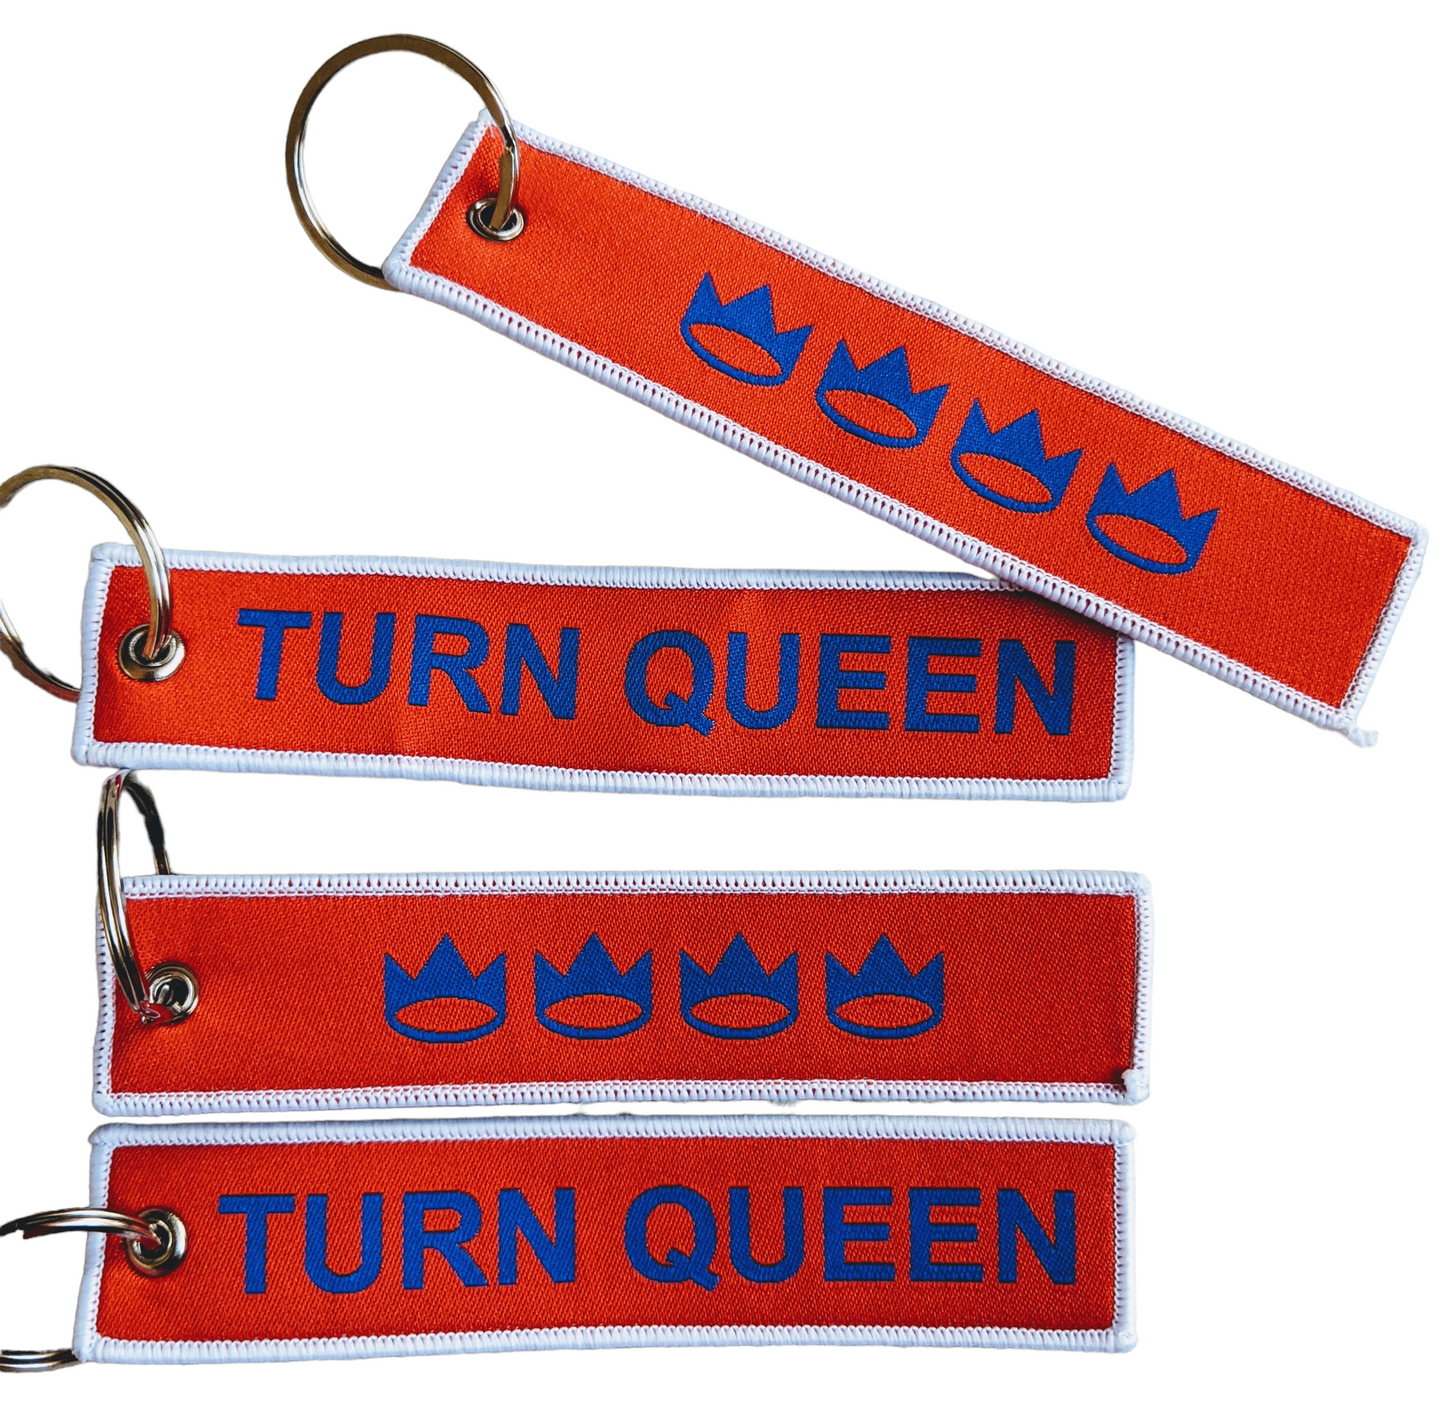 TURN QUEEN! Luggage Tag